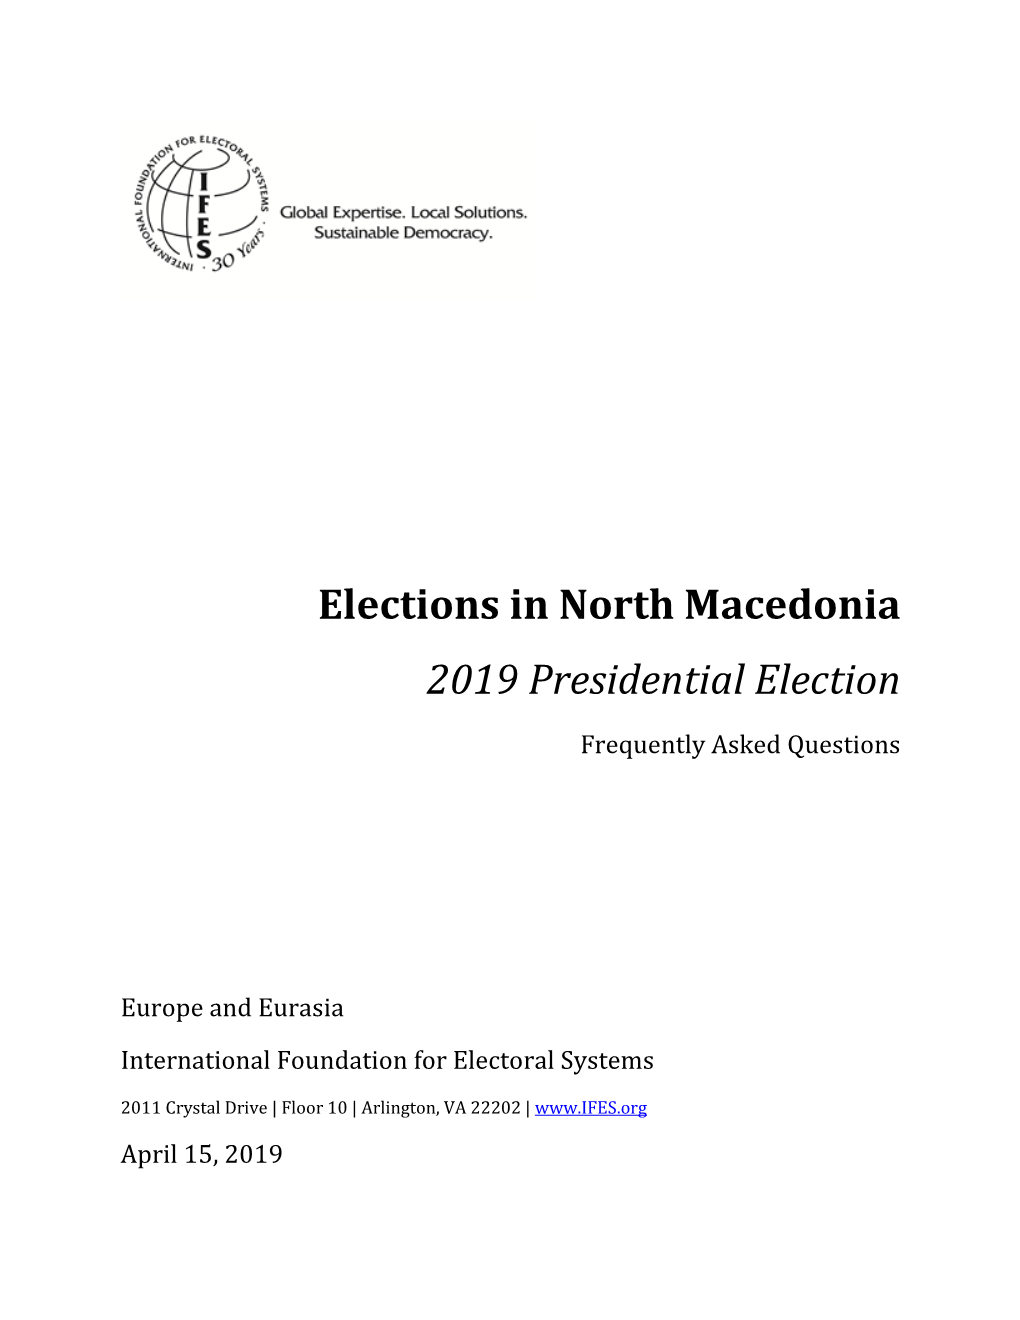 IFES Faqs on Elections in North Macedonia